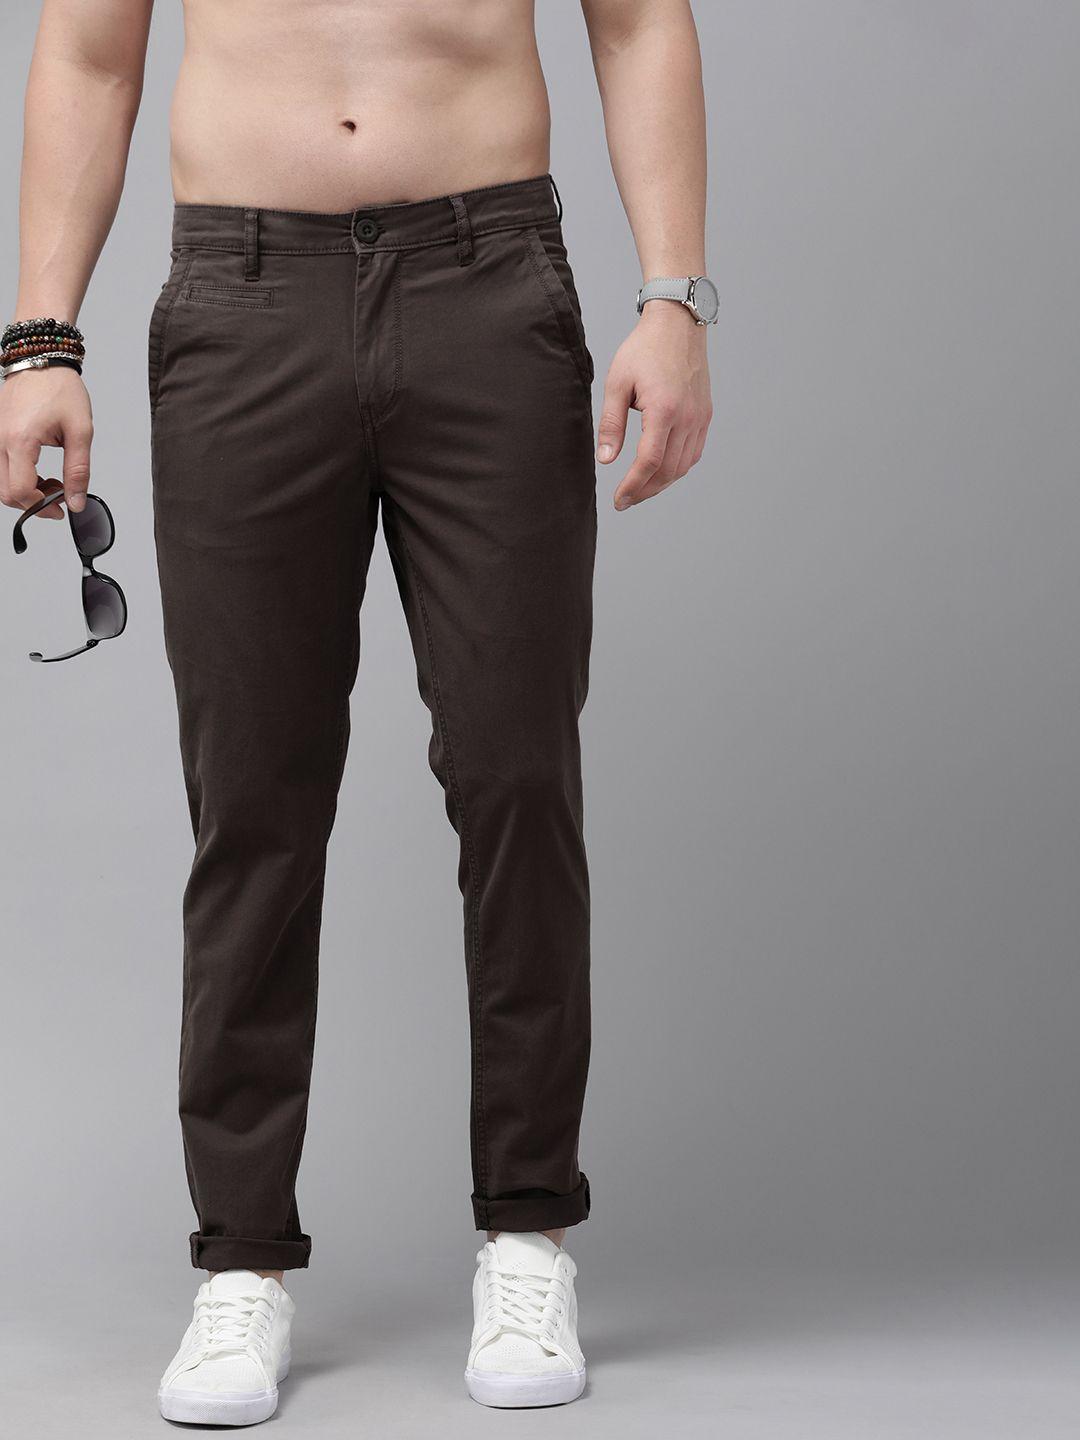 the roadster life co. men solid tapered fit smart casual chinos trousers